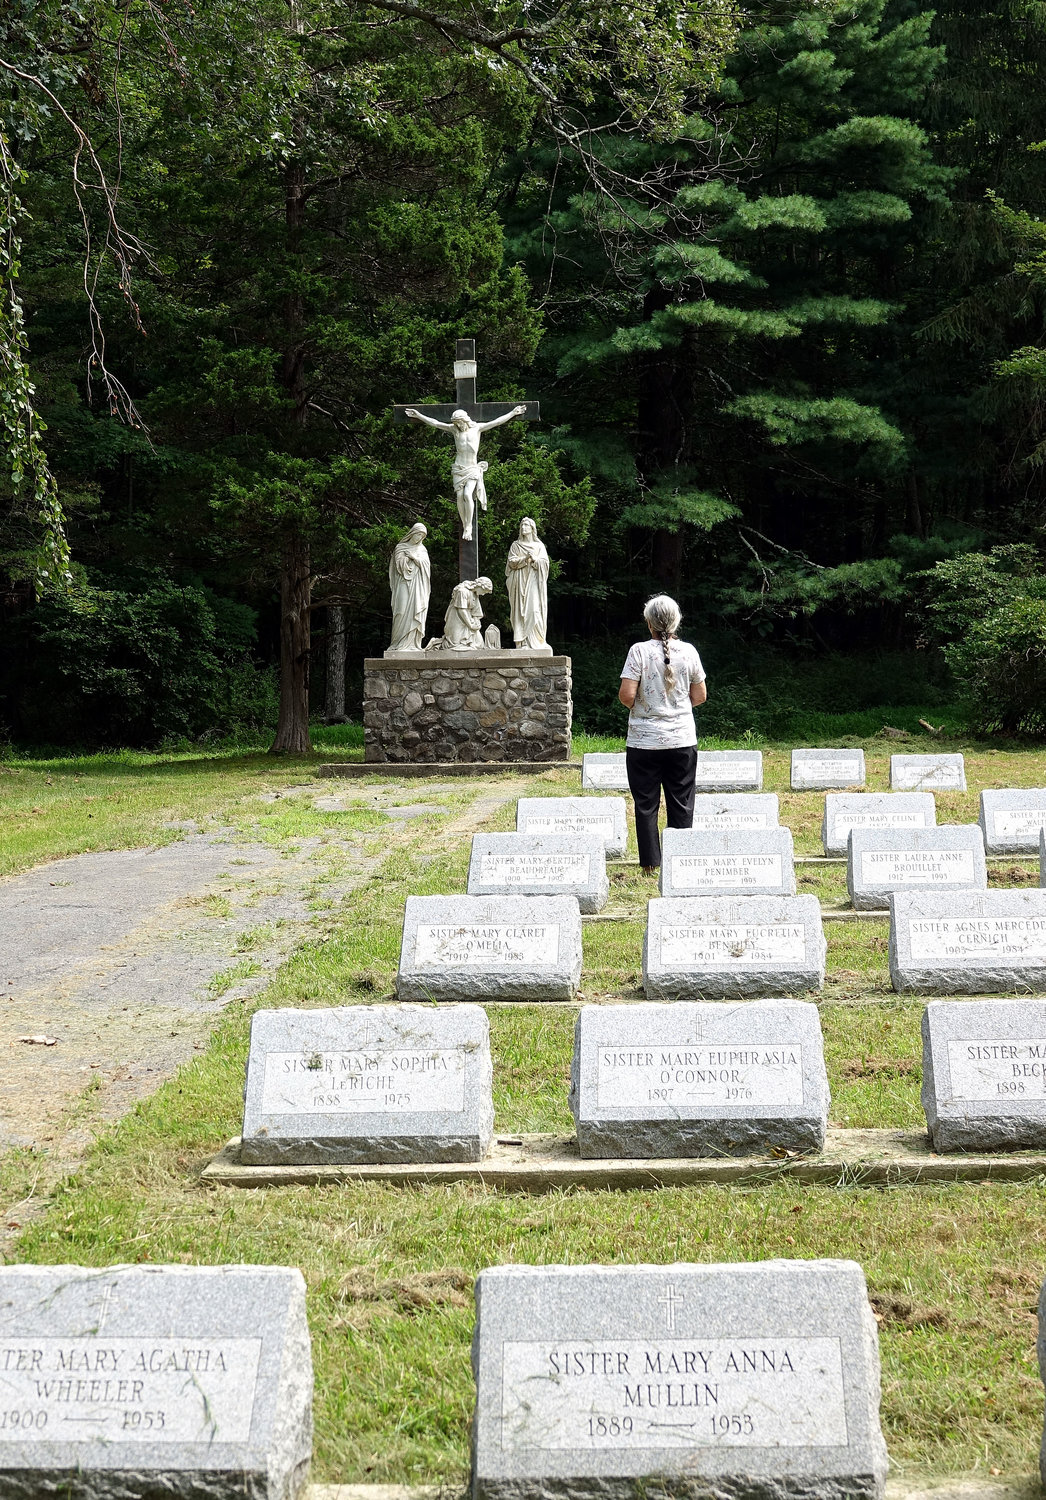 A visitor prays in the sisters’ cemetery at Marycrest, located on more than 100 acres of land in Orange County.